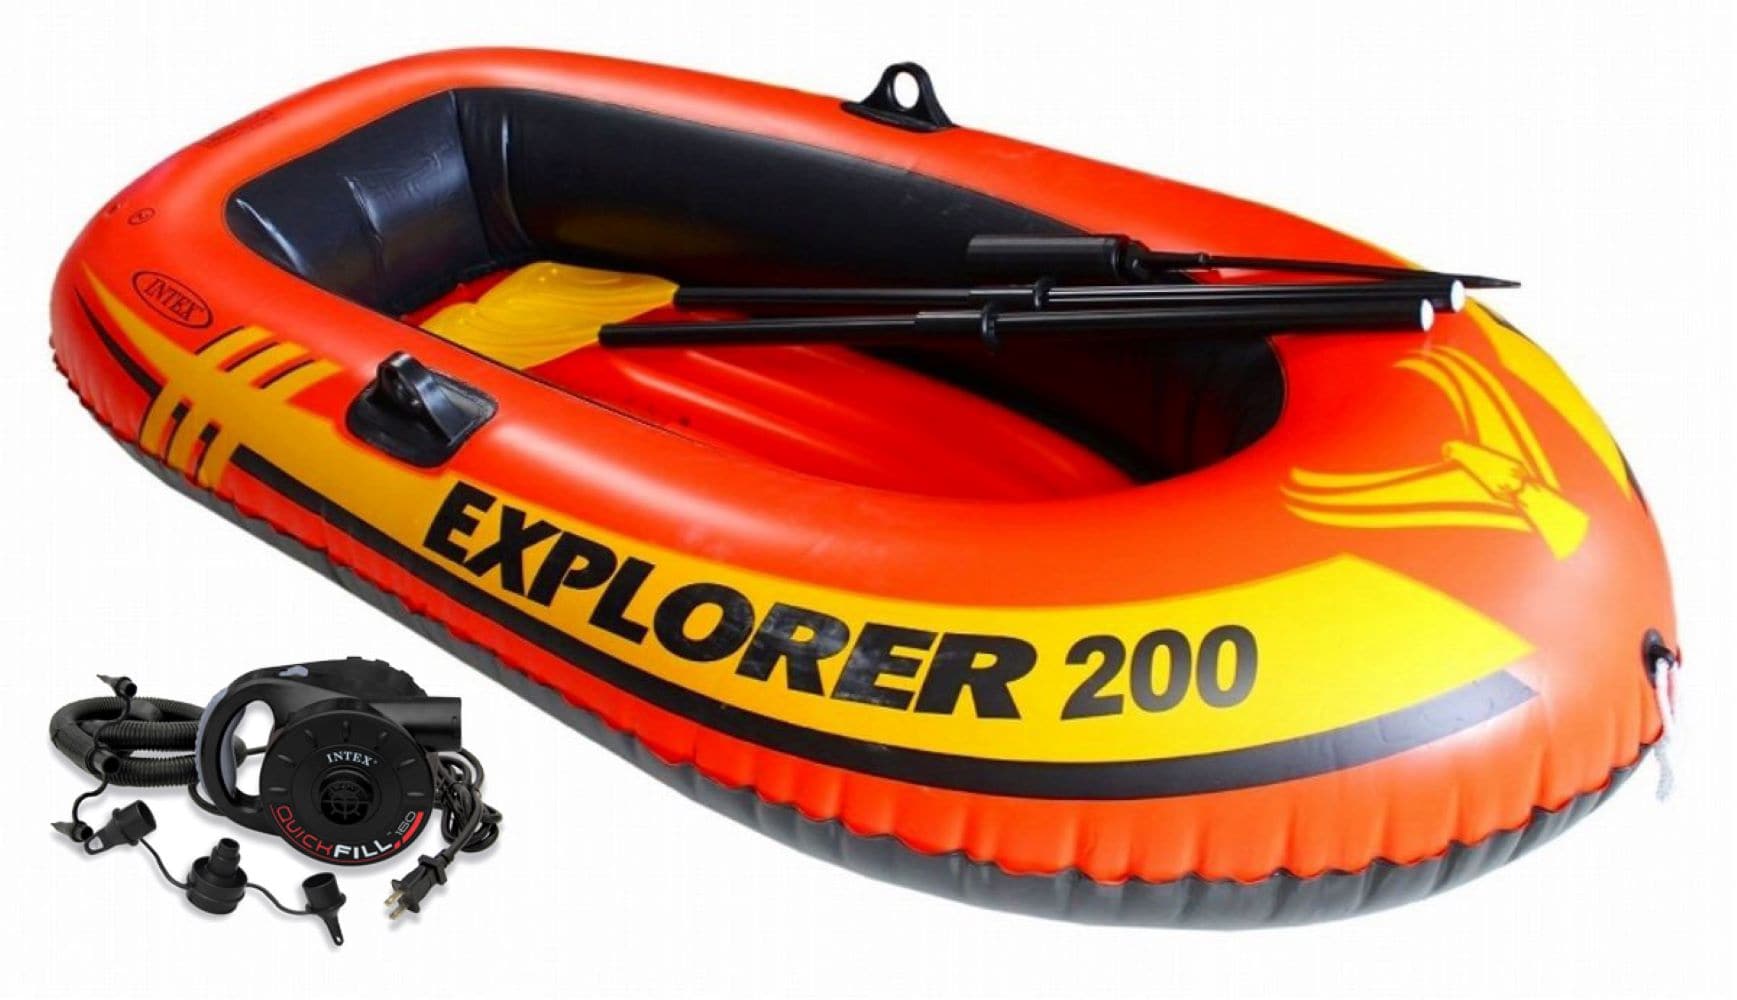 Intex Explorer 200 2 Person Inflatable Boat for sale online